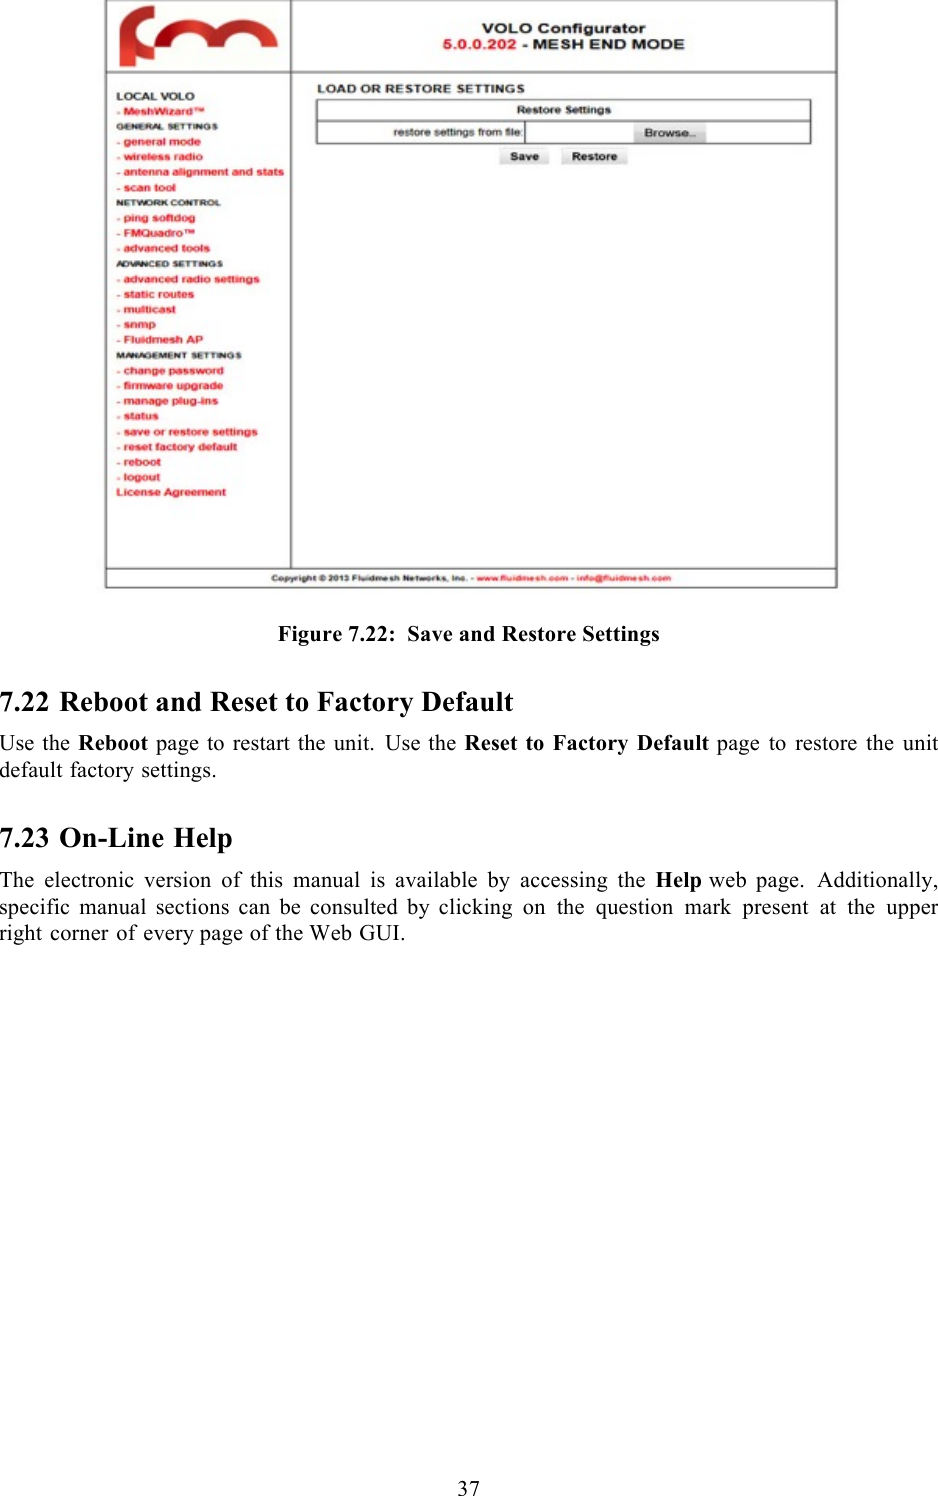  37    Figure 7.22:  Save and Restore Settings 7.22 Reboot and Reset to Factory Default Use the Reboot page to restart the unit. Use the Reset to Factory Default page to restore the unit default factory settings. 7.23 On-Line Help The electronic version of this manual is available by accessing the Help web page. Additionally, specific manual sections can be consulted by  clicking on the question mark present at the upper right corner of every page of the Web GUI. 